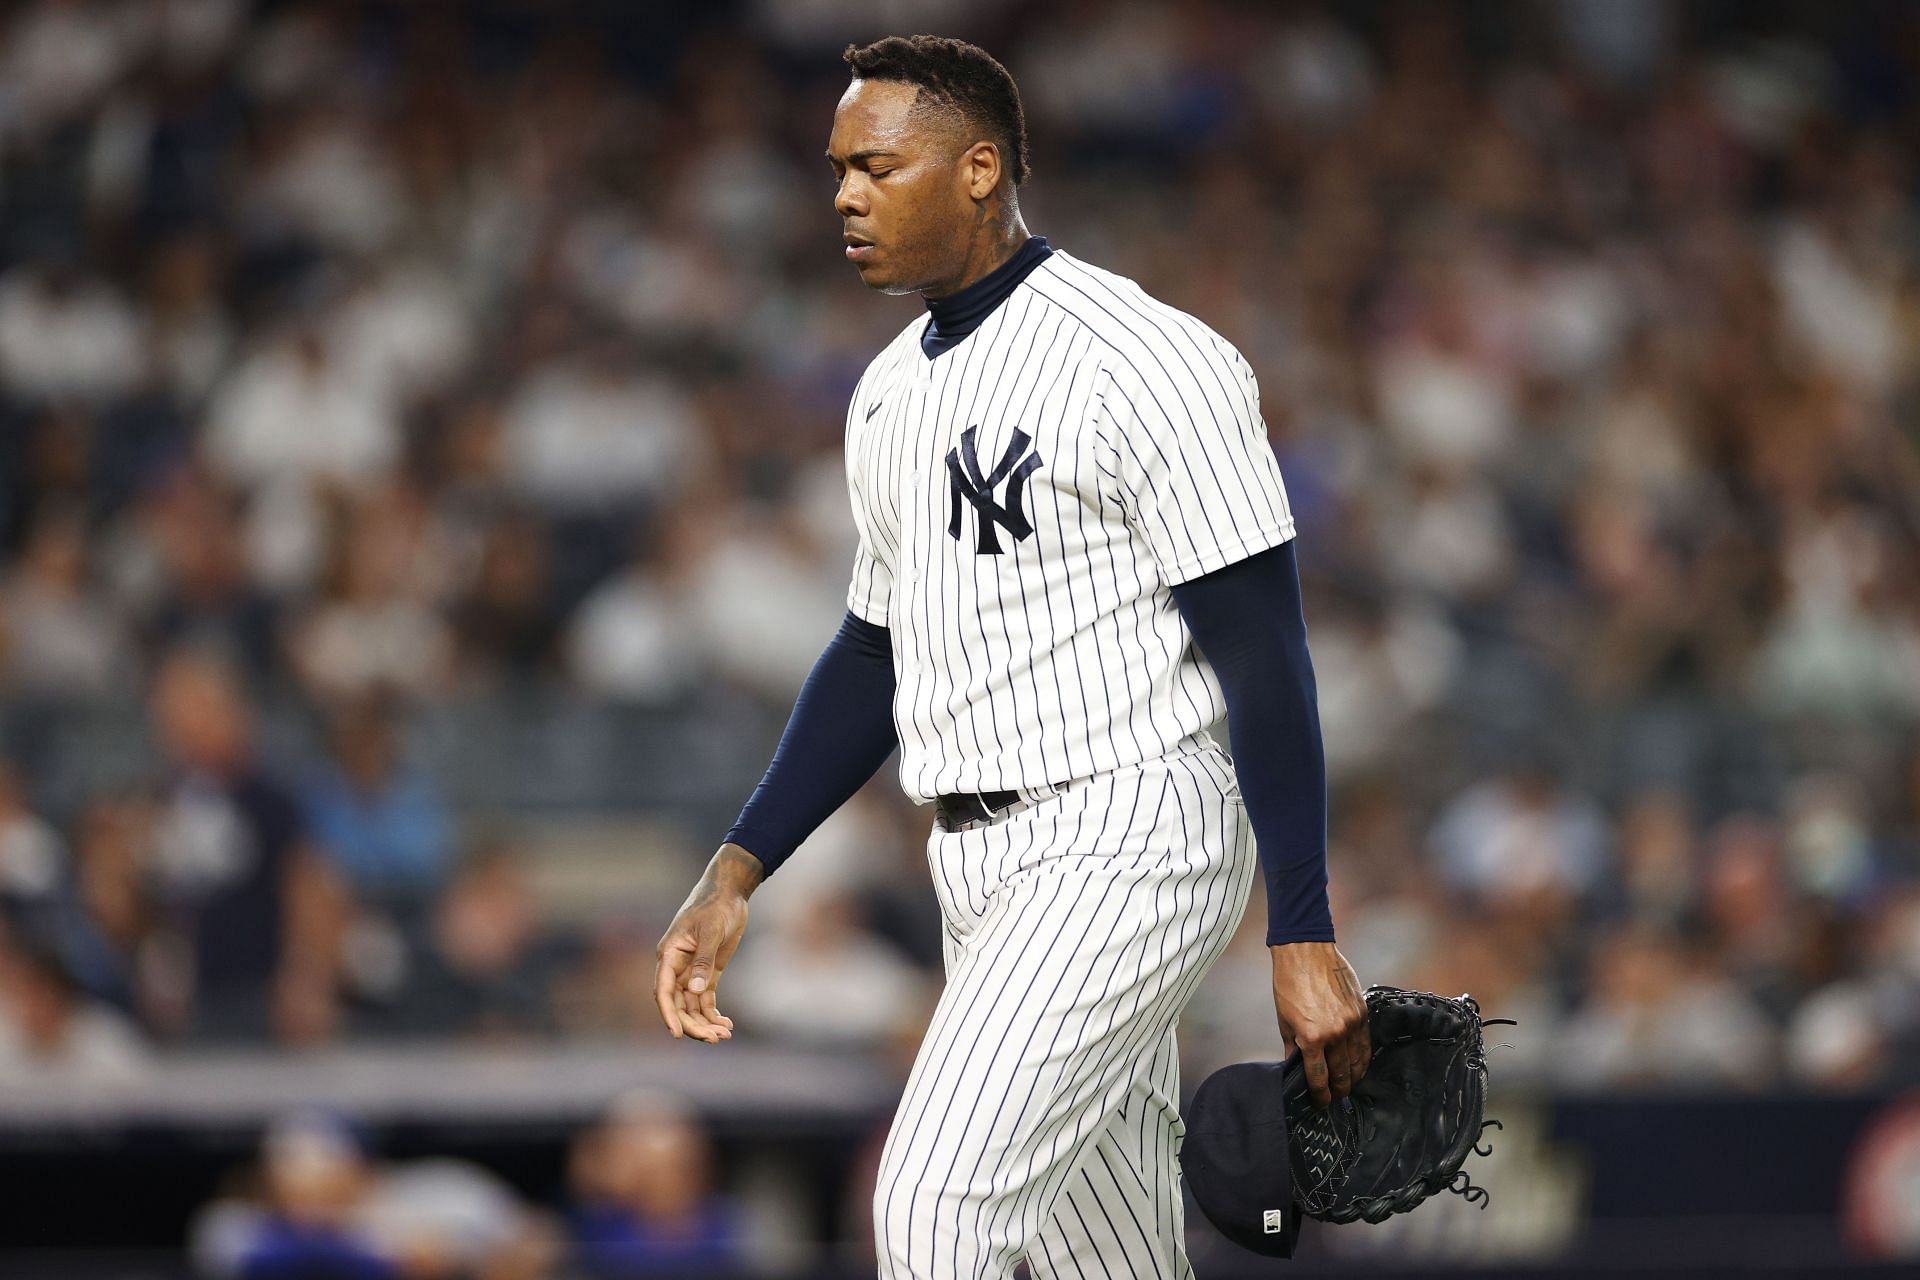 Reign of fire: Yankees' Aroldis Chapman (and everyone else) is bringing the  heat in 2021  and it's here to stay